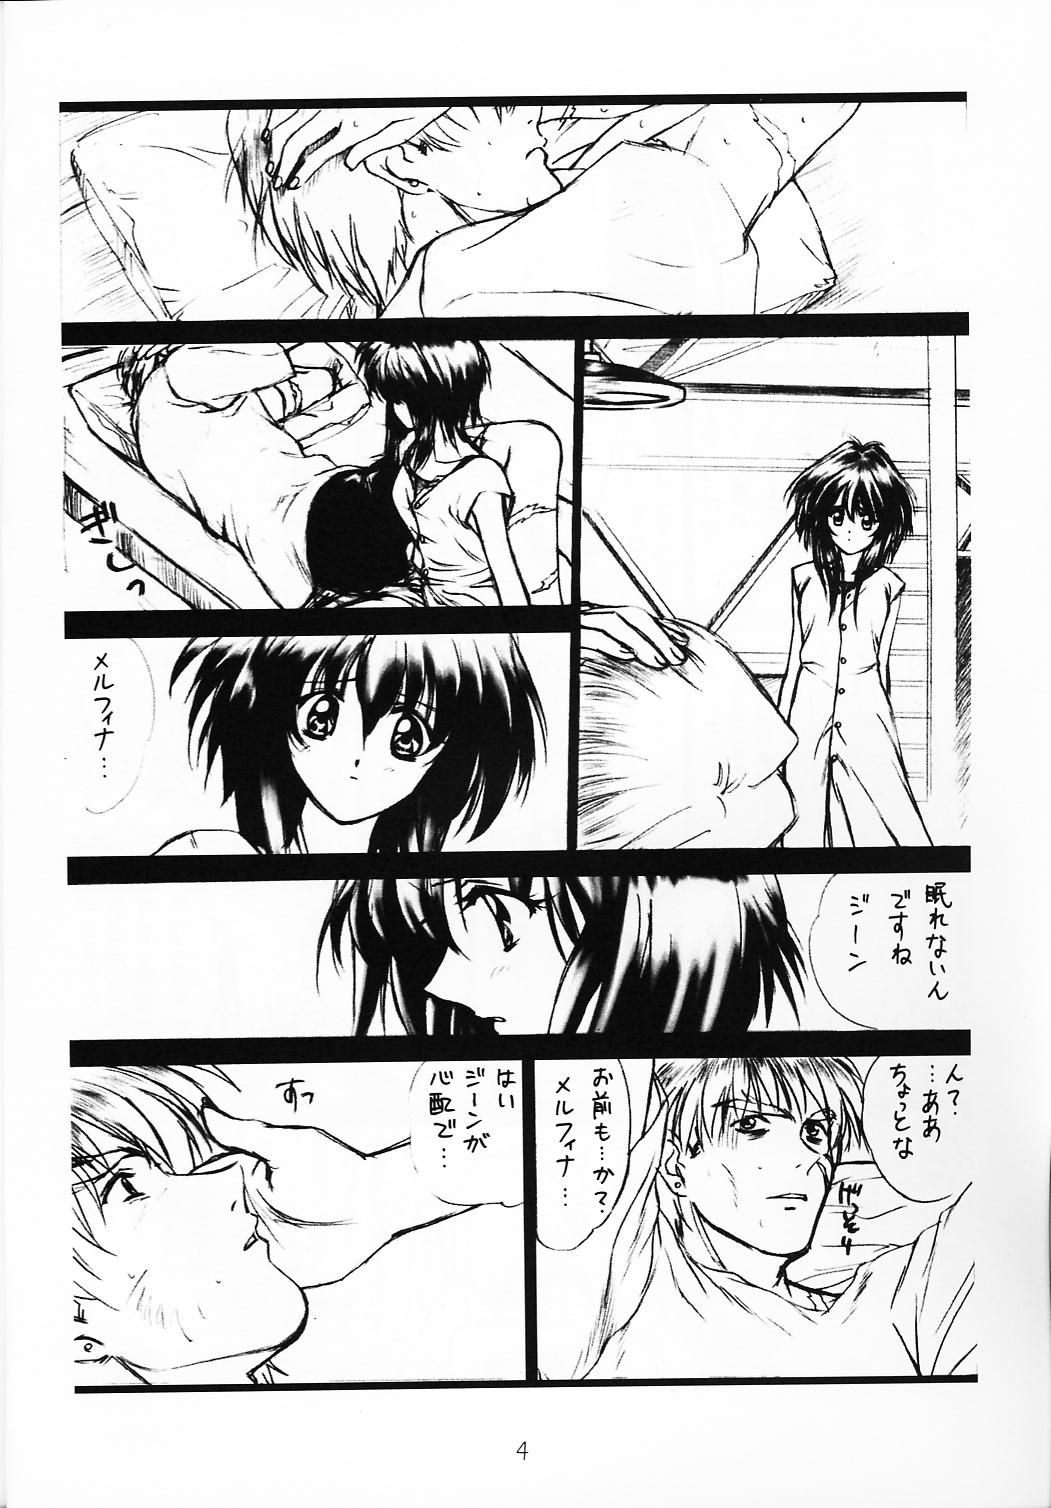 Gayfuck voguish I OUTLAW STAR - Outlaw star Hunks - Page 3